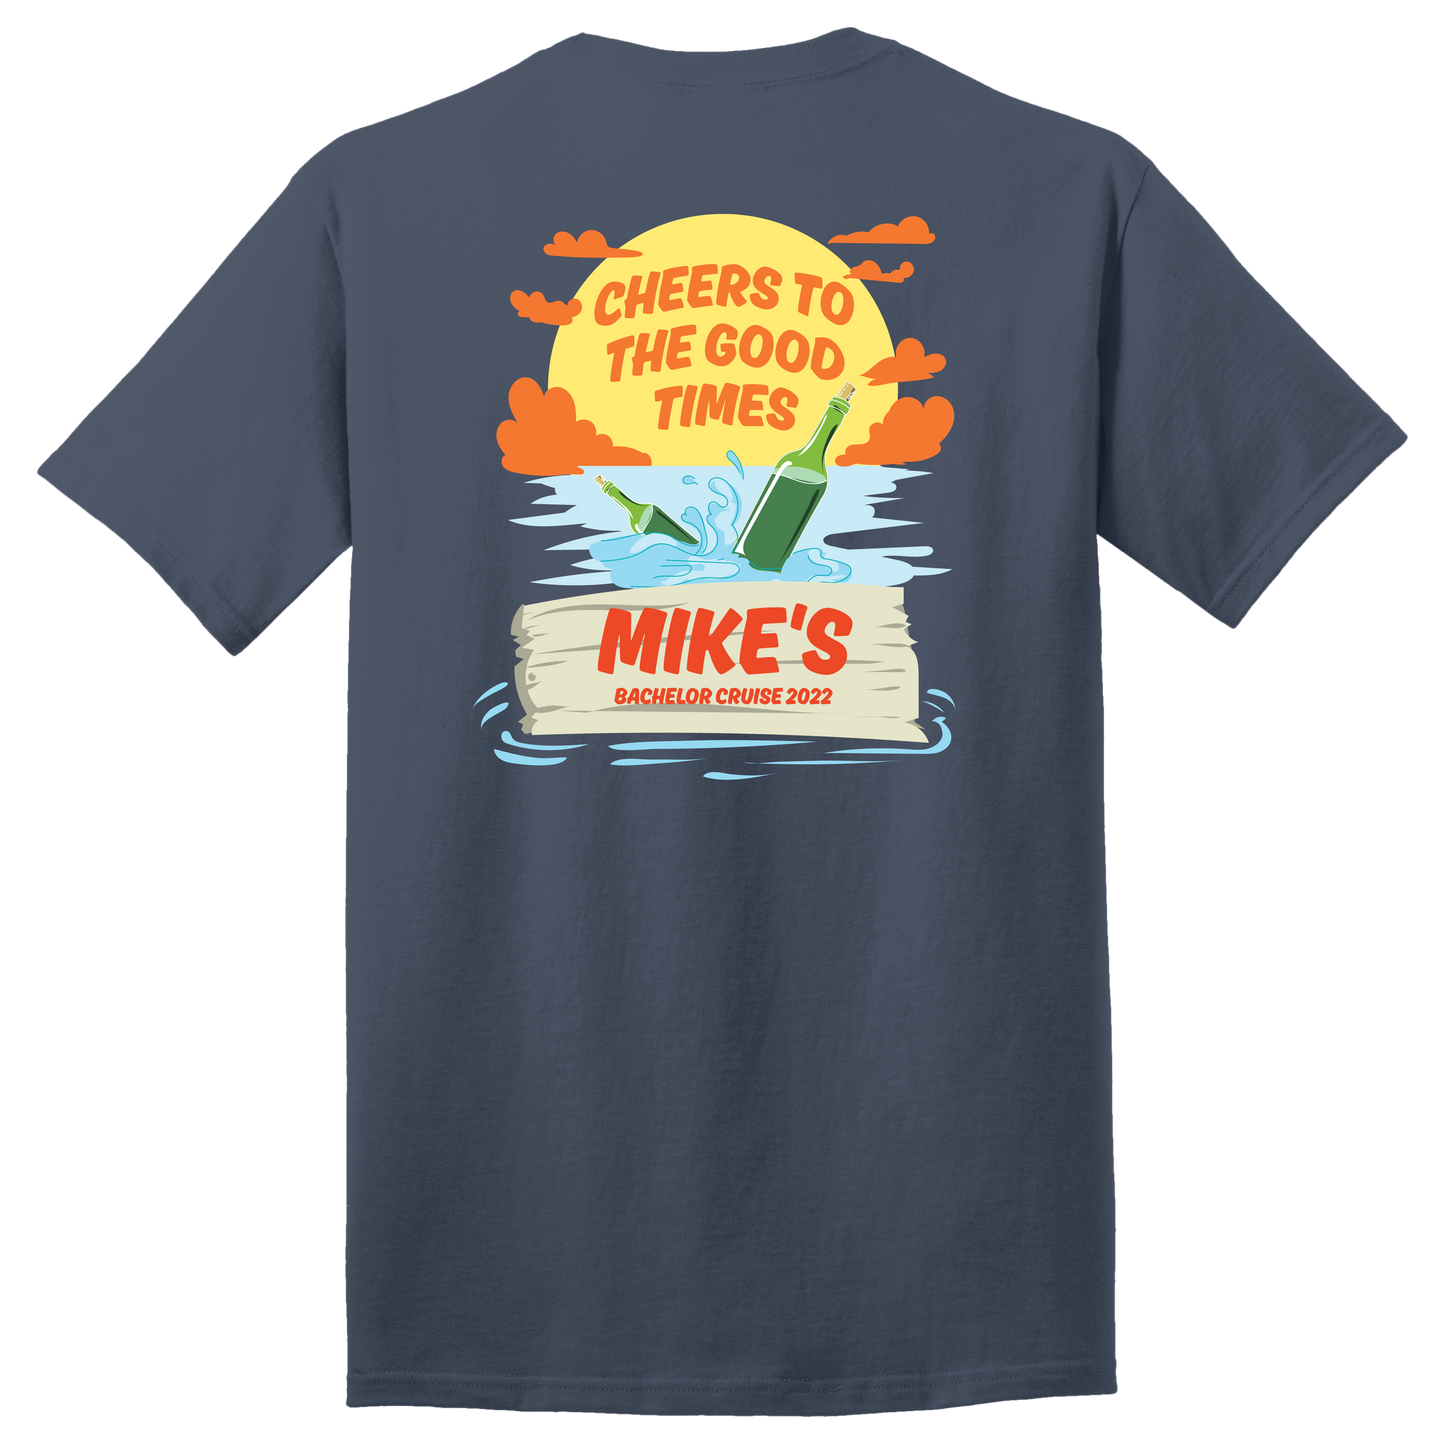 Good Times - Men's Personalized T-Shirt